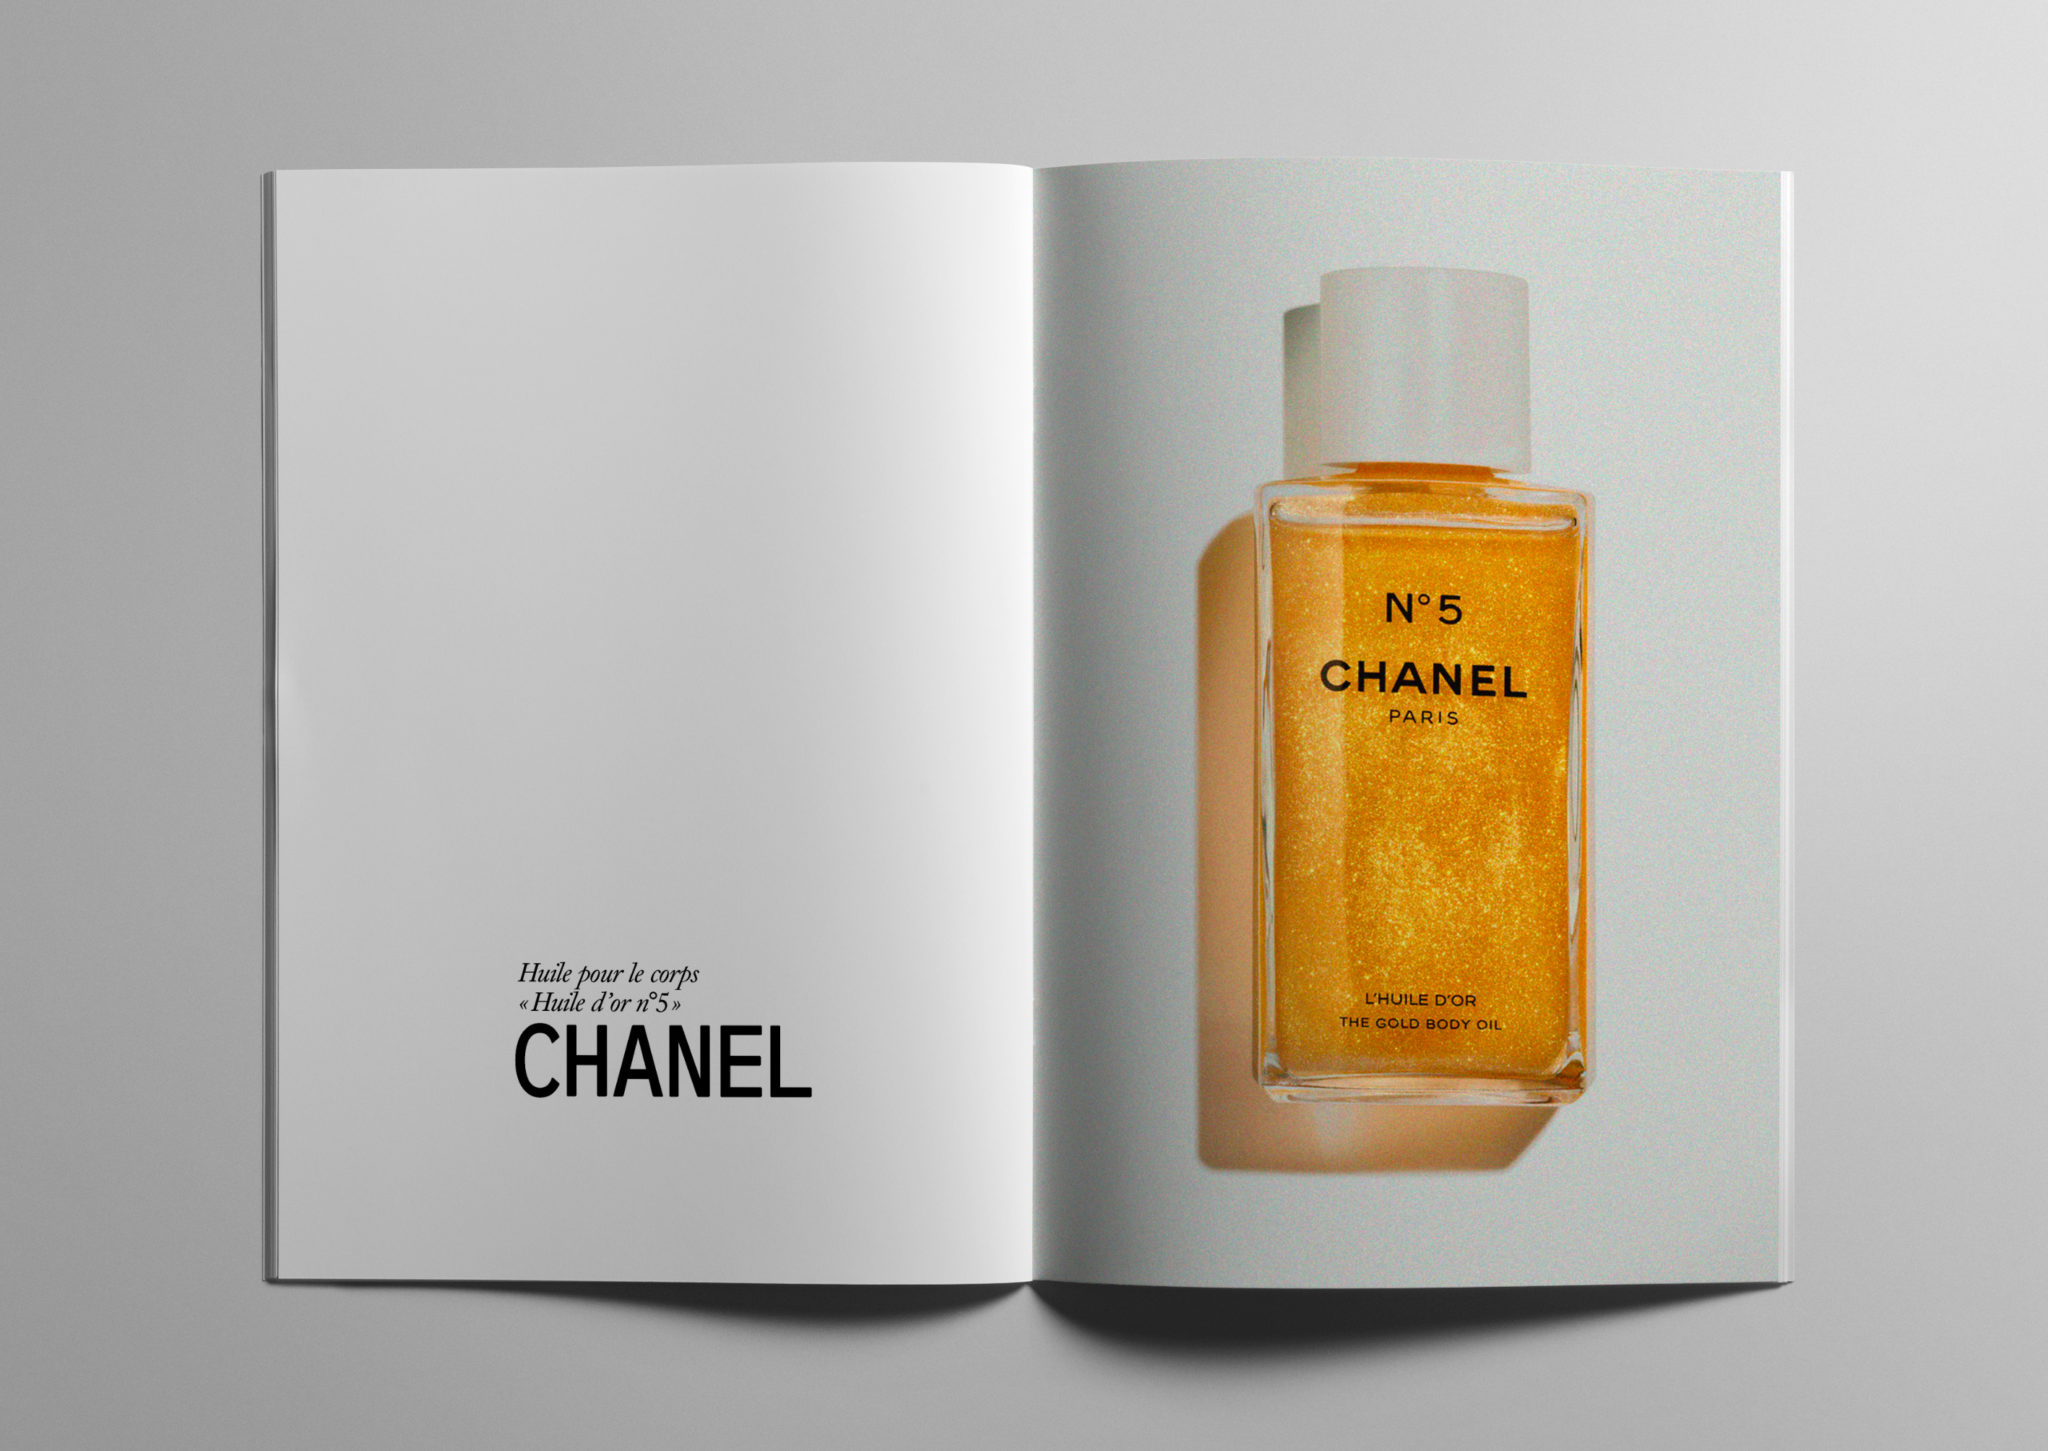 Huile pour le corps « Huile d’or n°5 », CHANEL